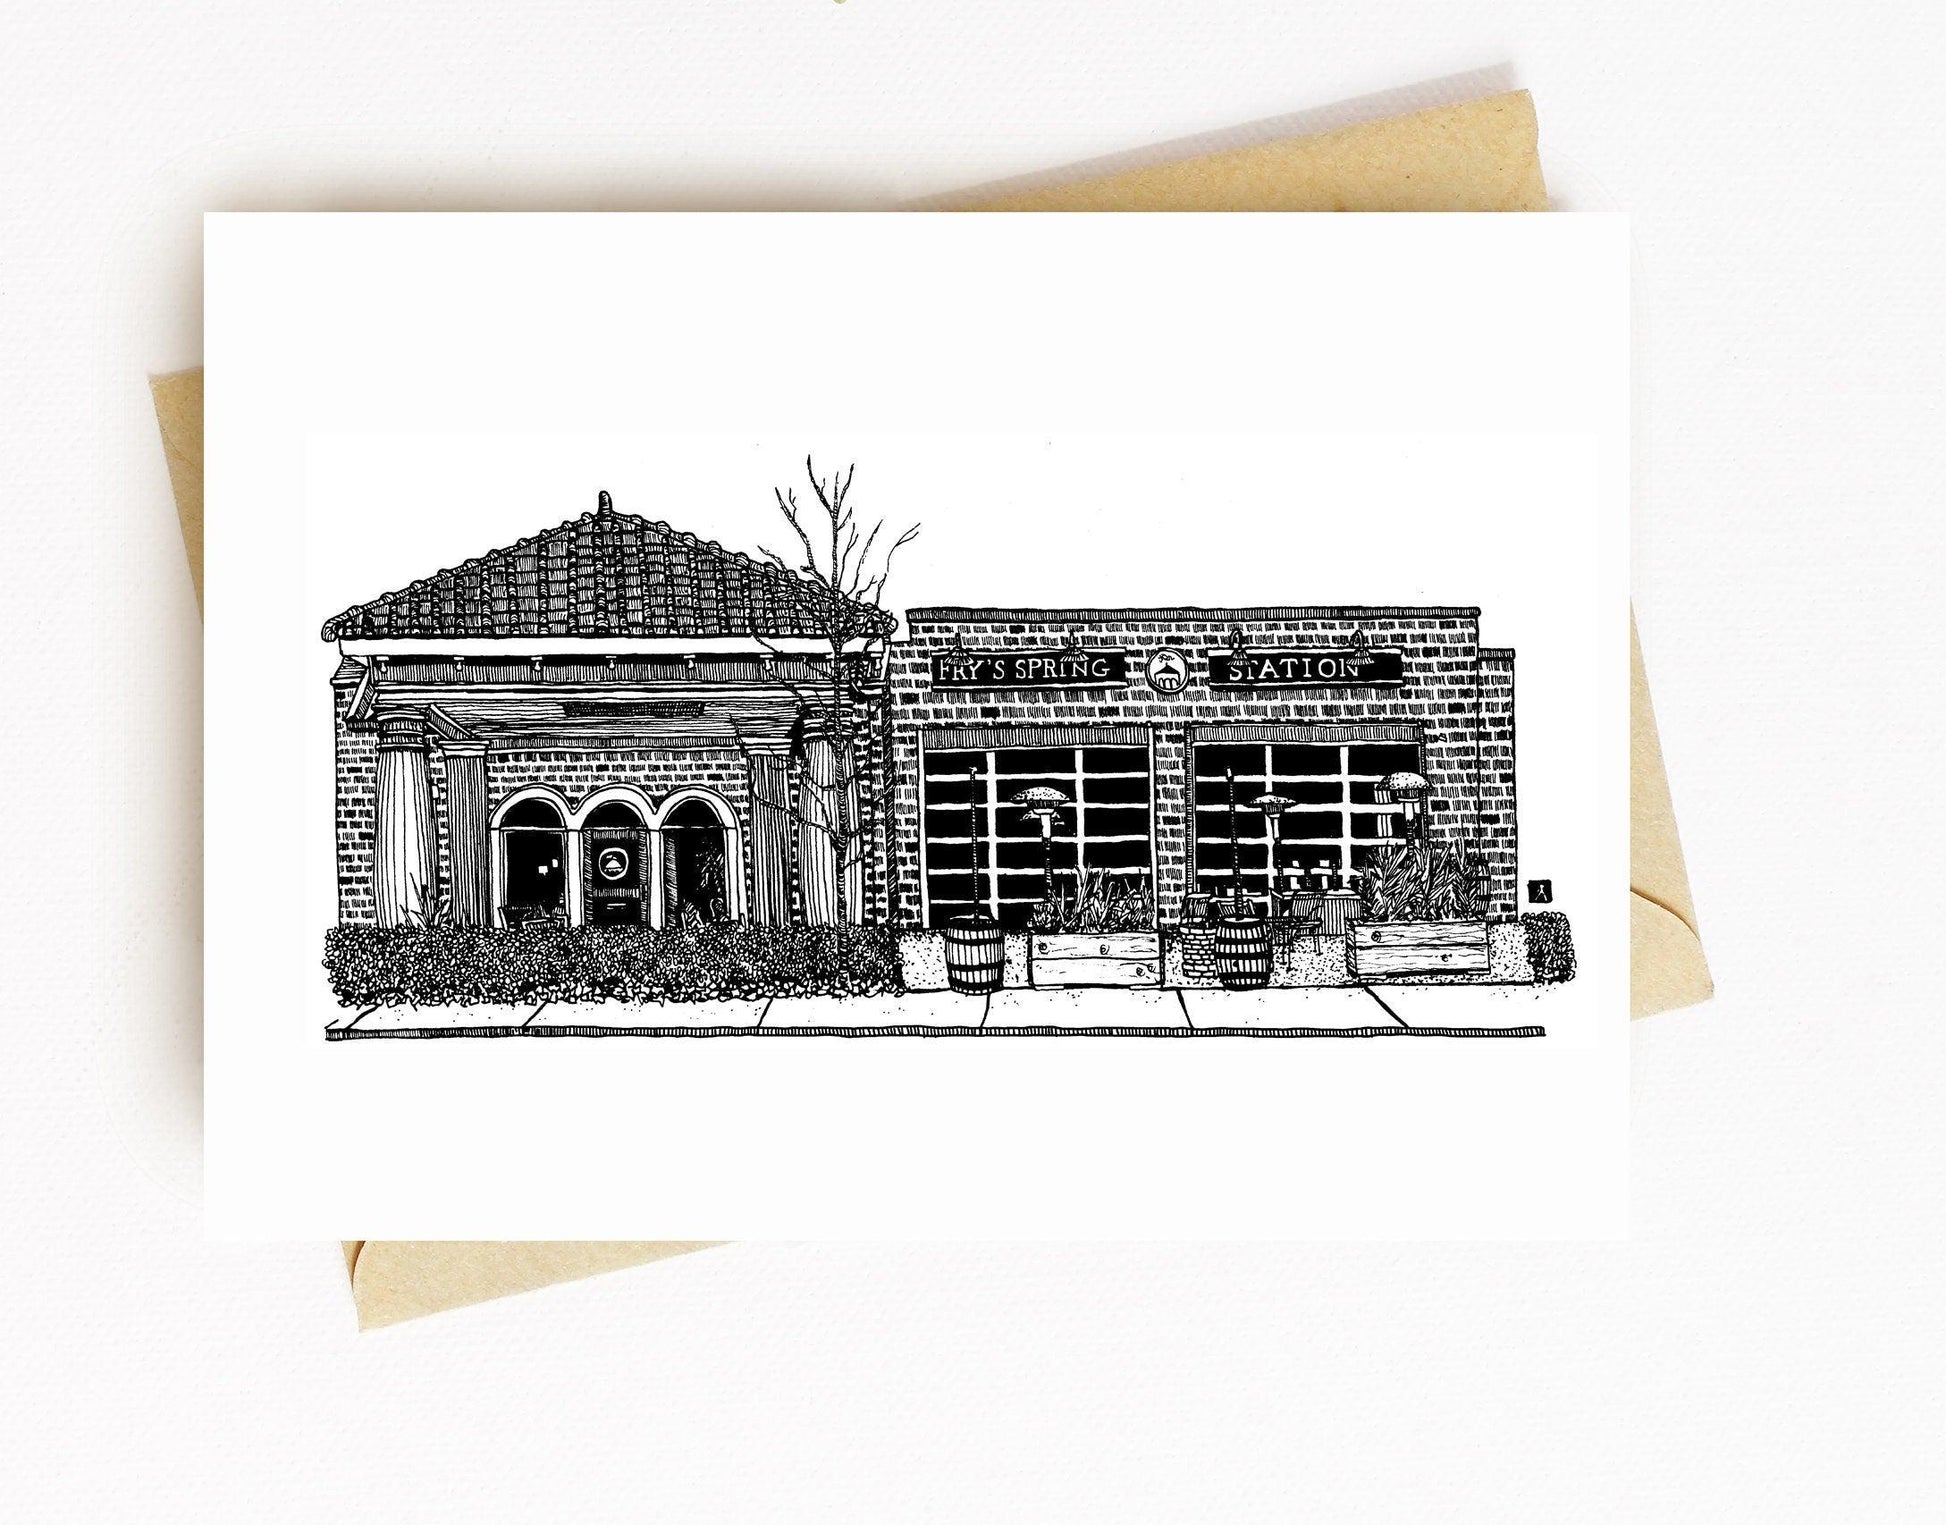 BellavanceInk: Greeting Card With A Pen & Ink Drawing Of Fry's Spring Station Restaurant Charlottesville  5 x 7 Inches - BellavanceInk